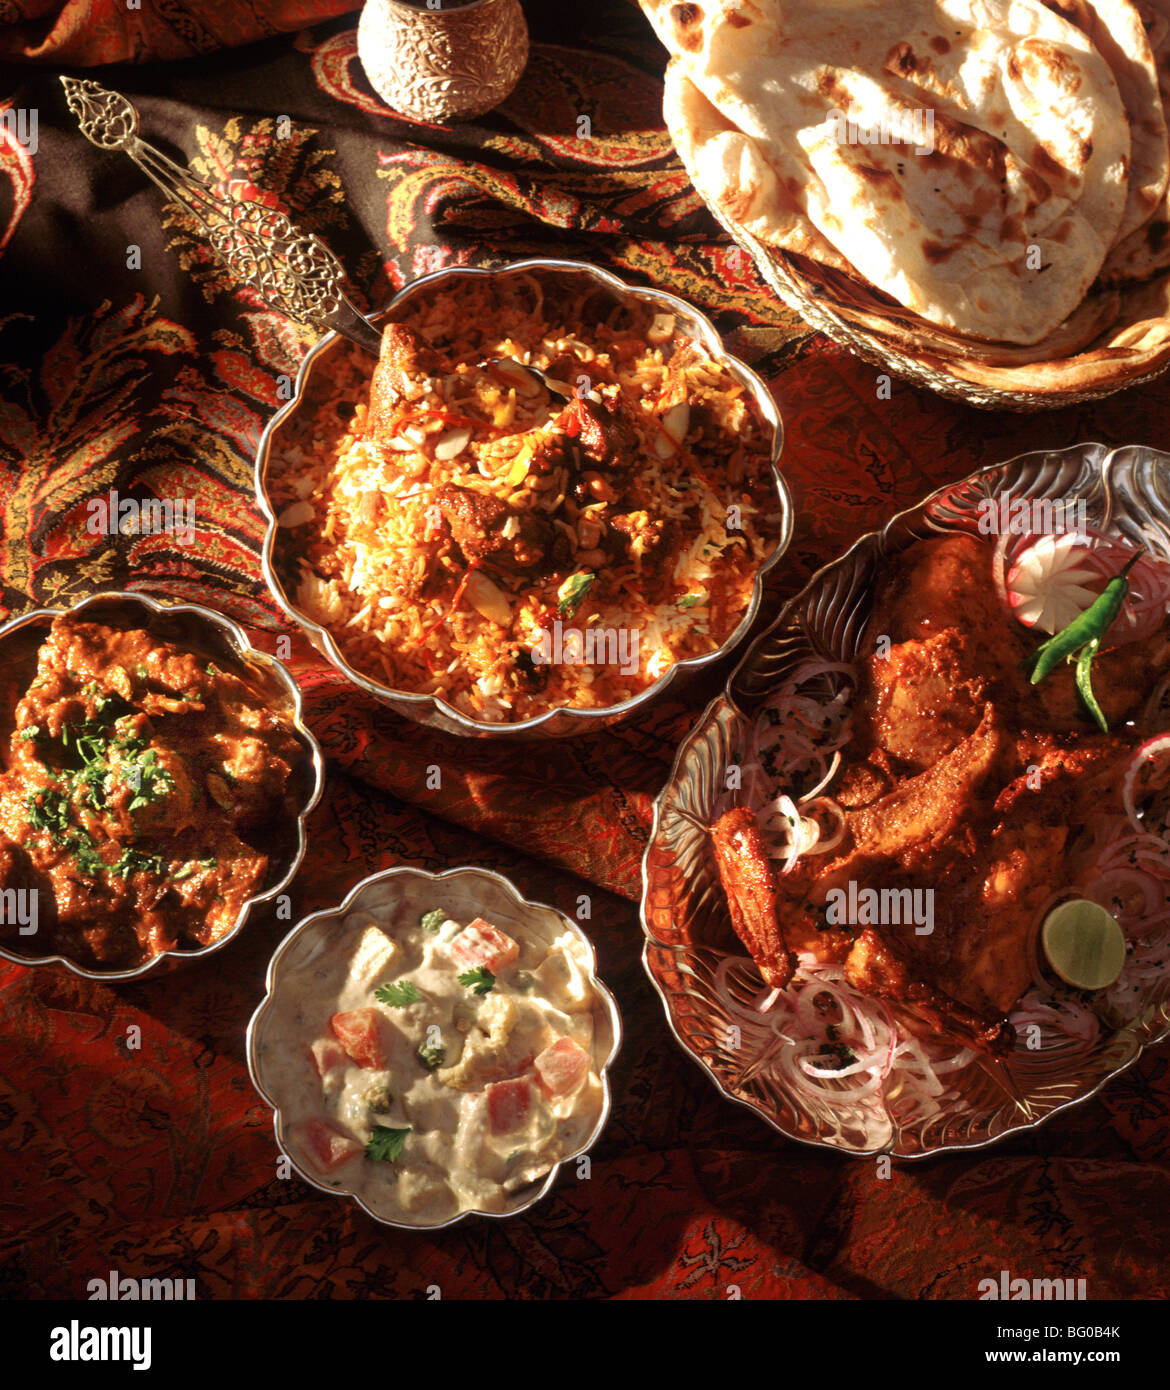 Northern Indian food, India, Asia Stock Photo